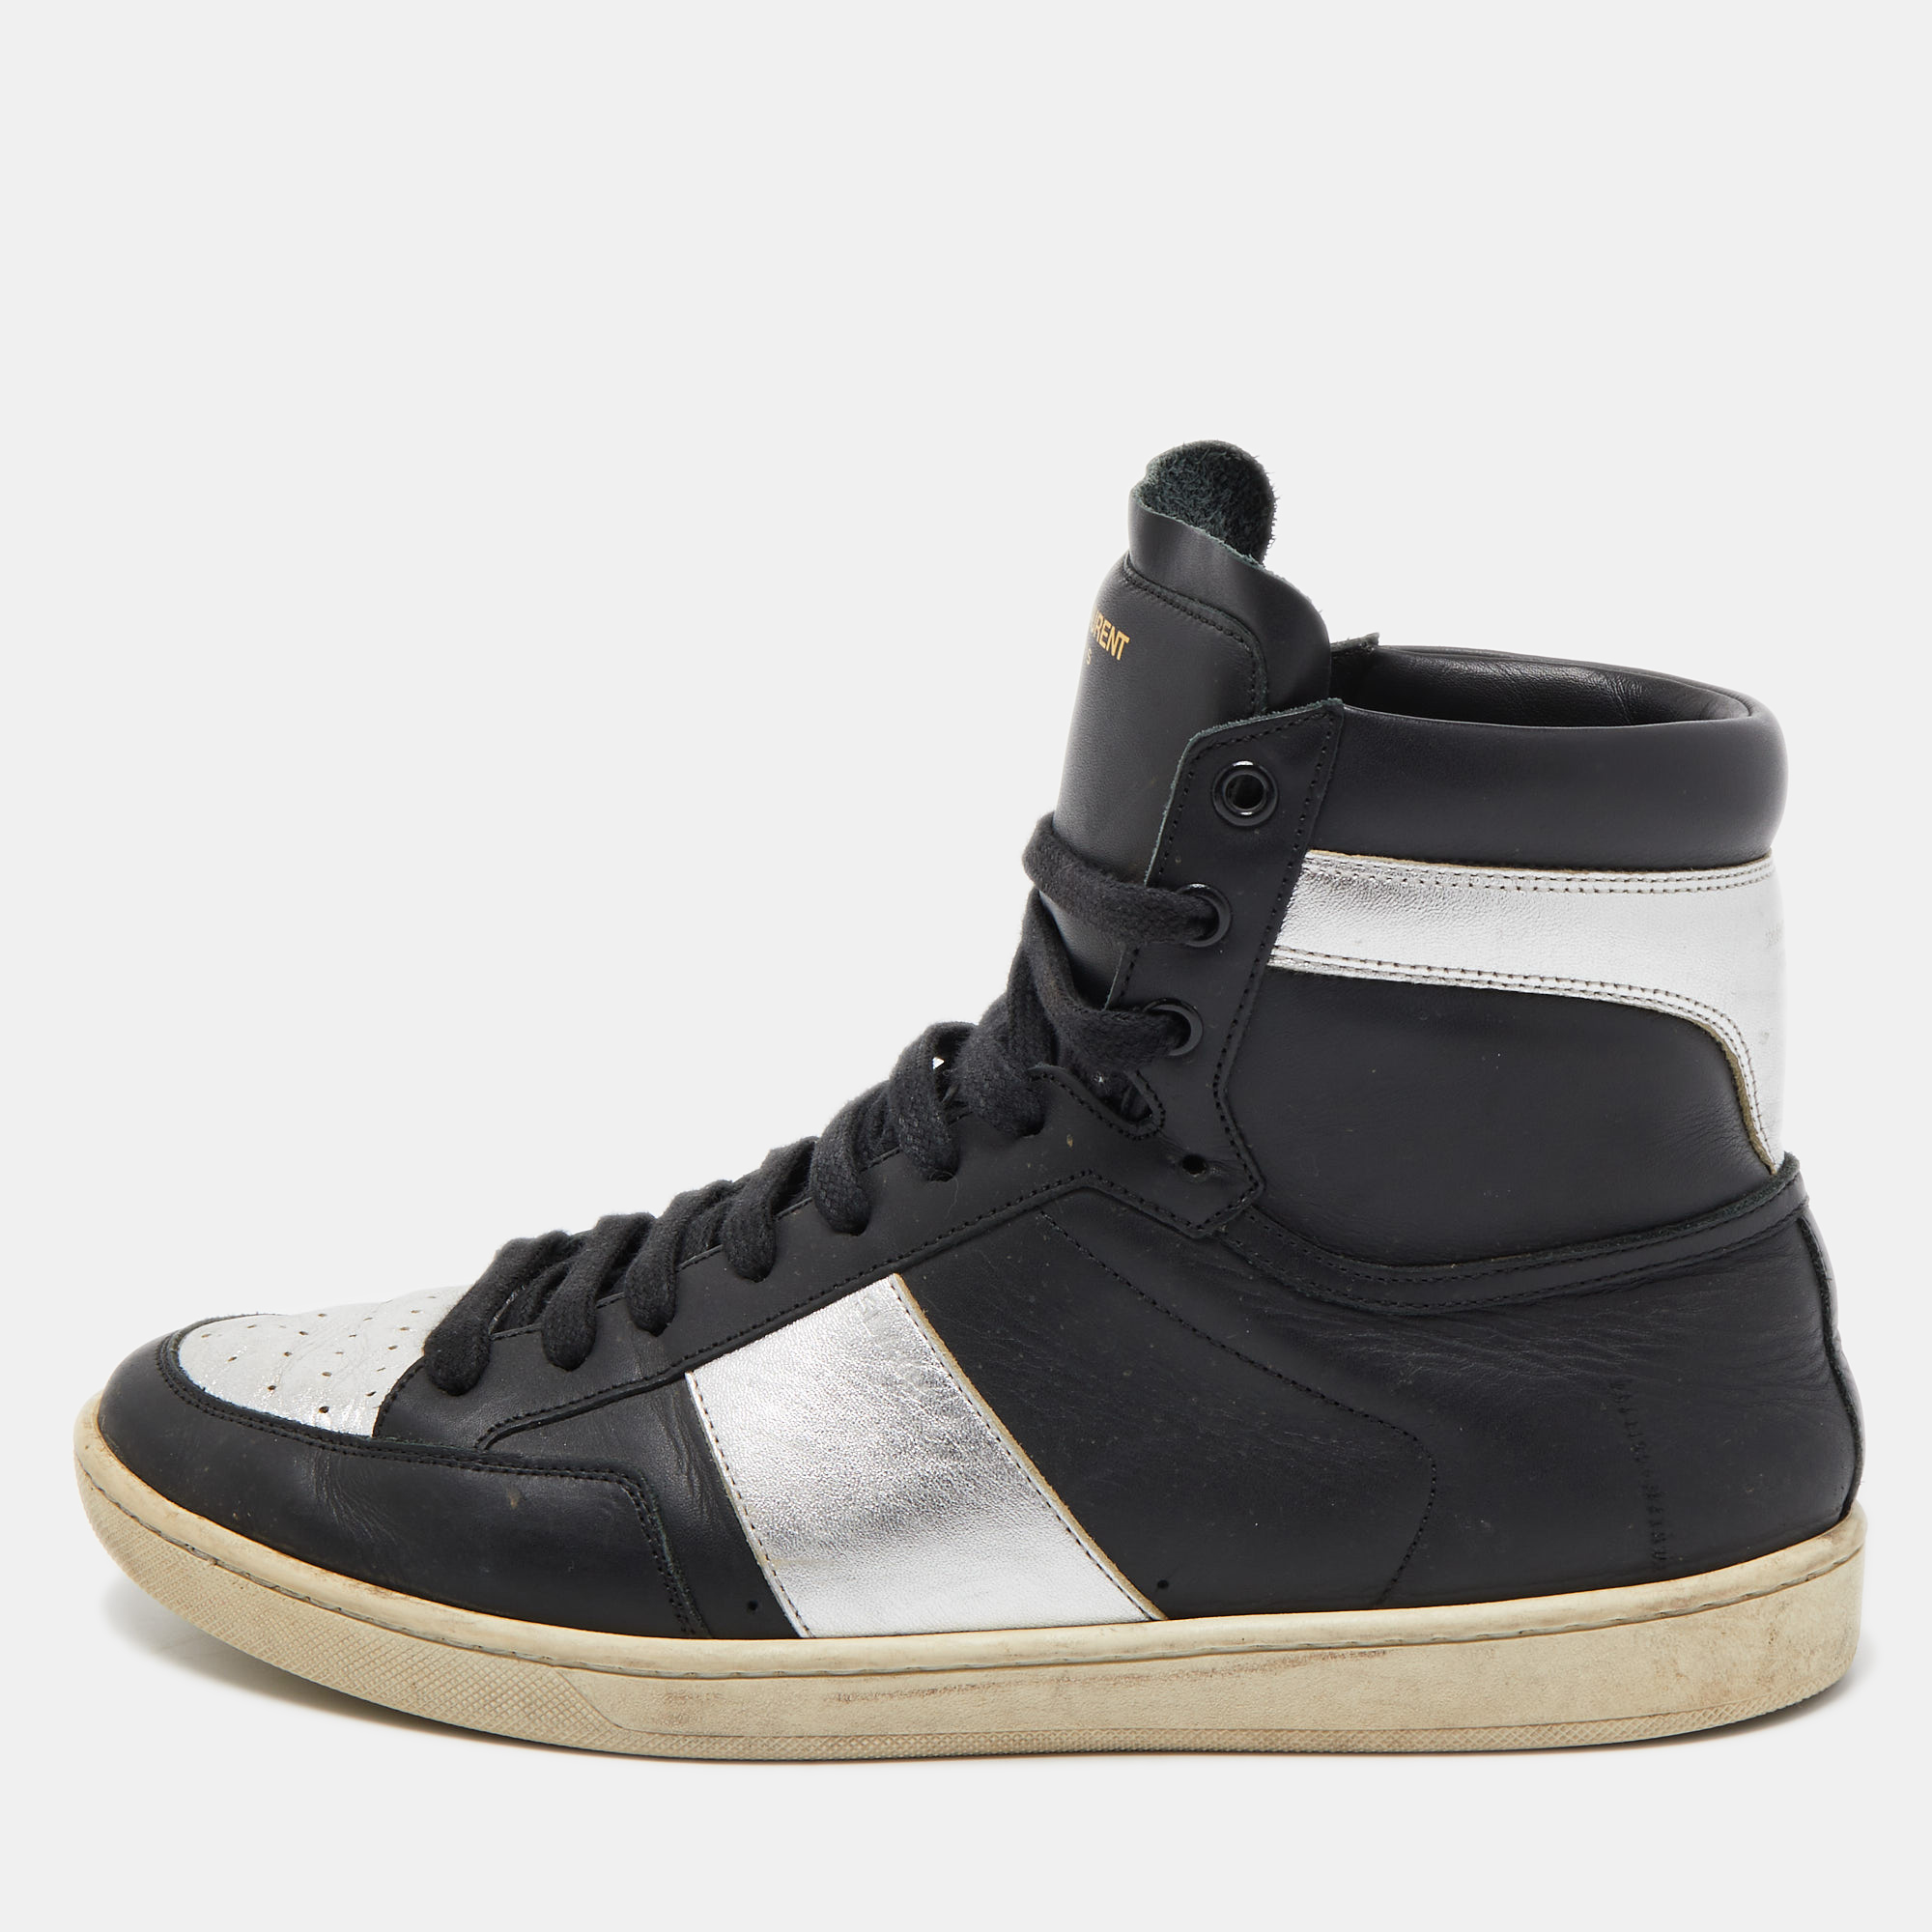 

Saint Laurent Black/Silver Leather Court Classic SL/10h High Top Sneakers Size